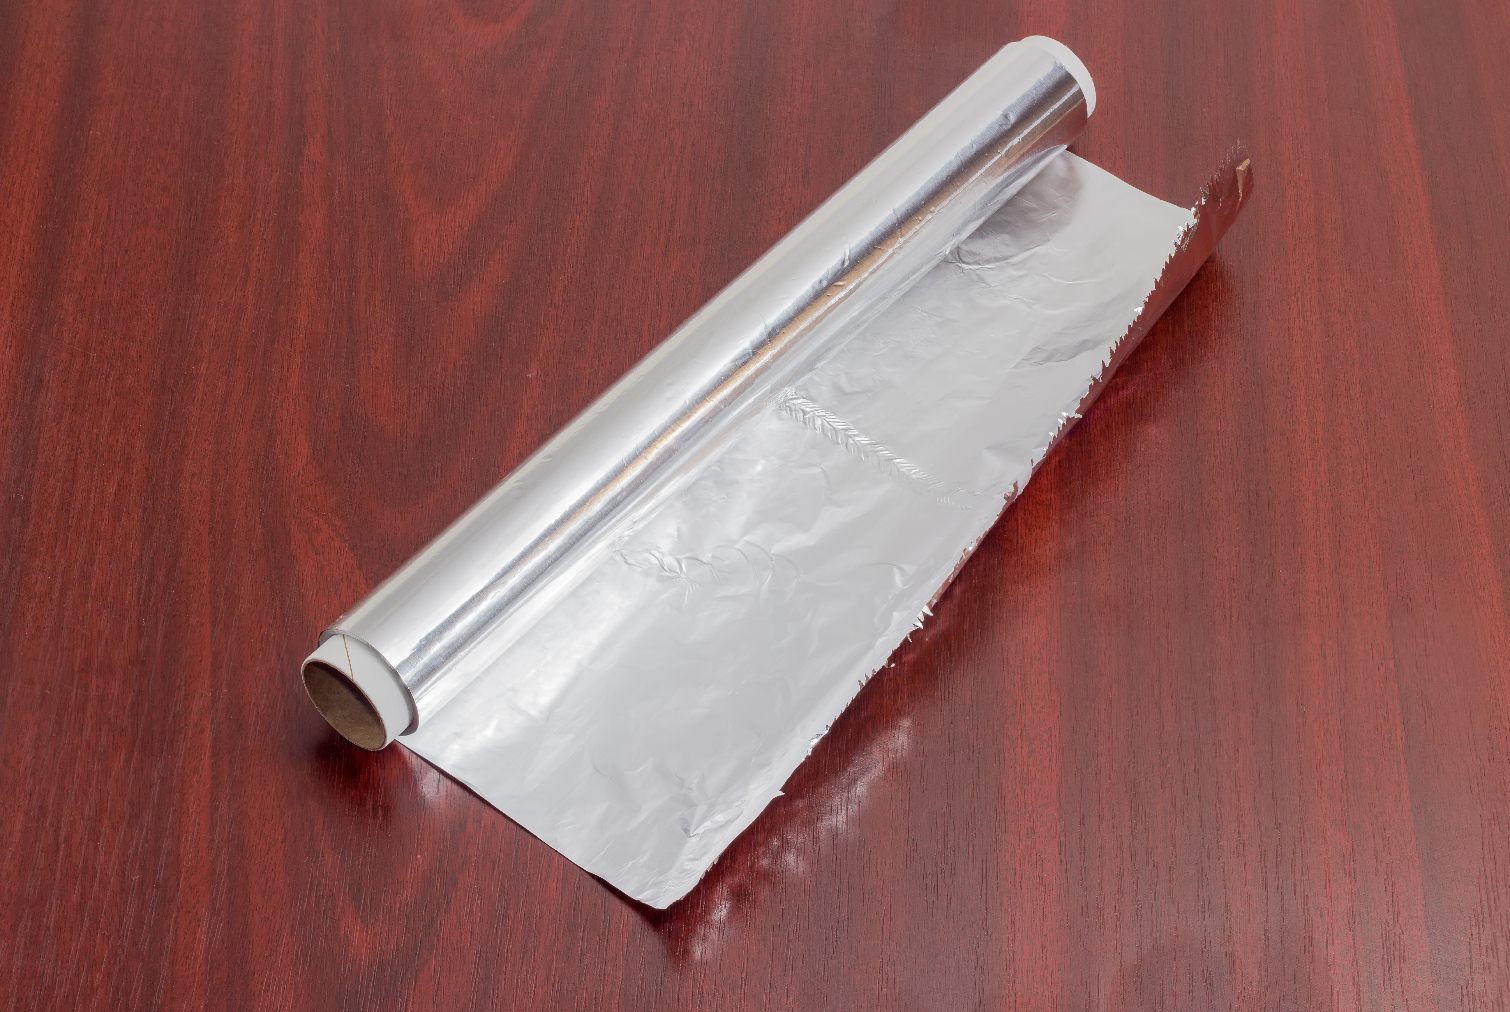 Aluminum Foil Can Boost Your Wi-Fi Signal | Tom's Guide